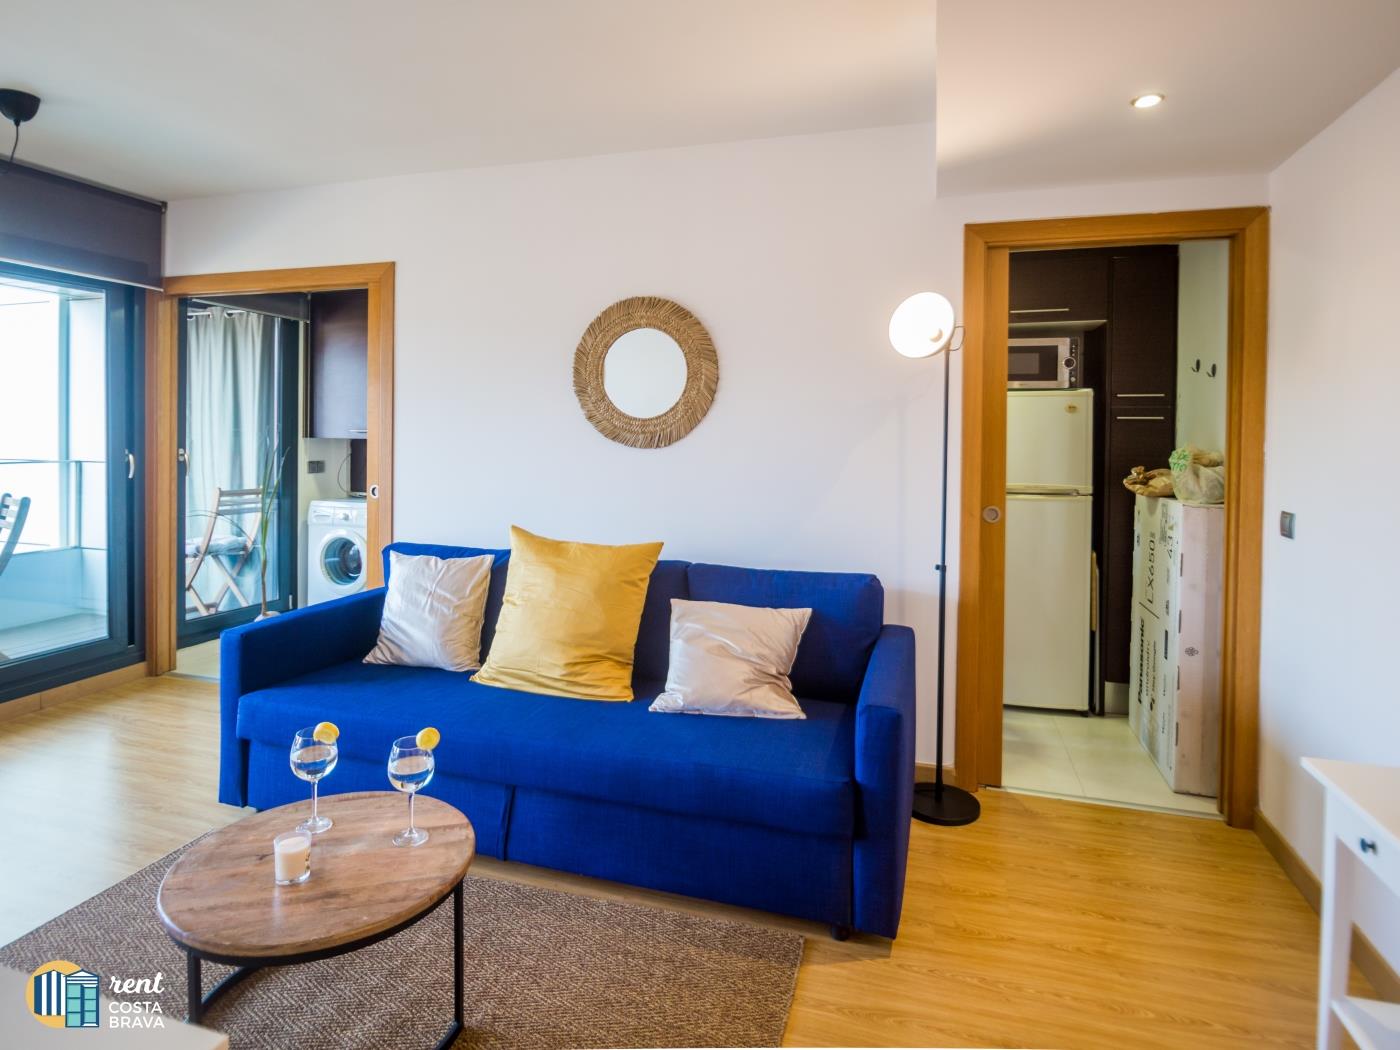 Diana apartment in Platja d'Aro close to the centre and the beach. in Castell-Platja d'Aro